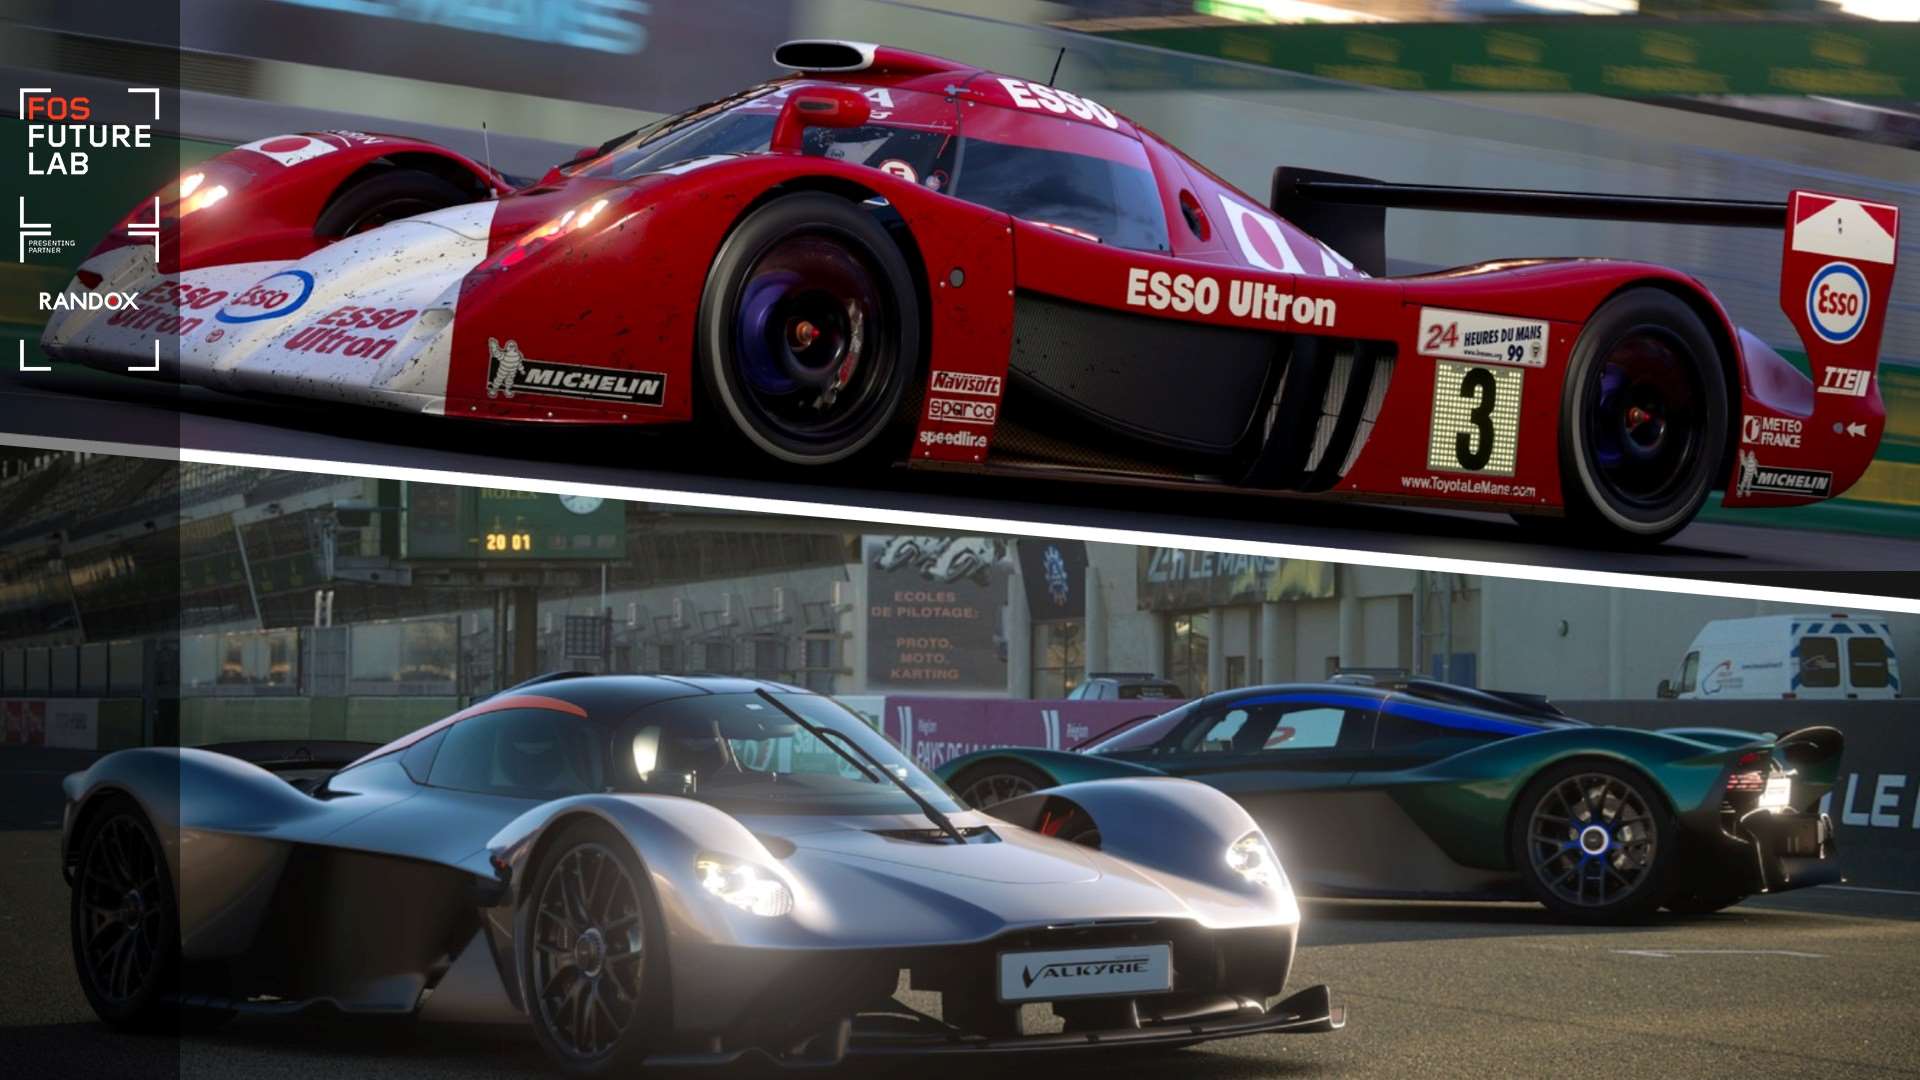 The 17 best cars on Gran Turismo 7 | GRR